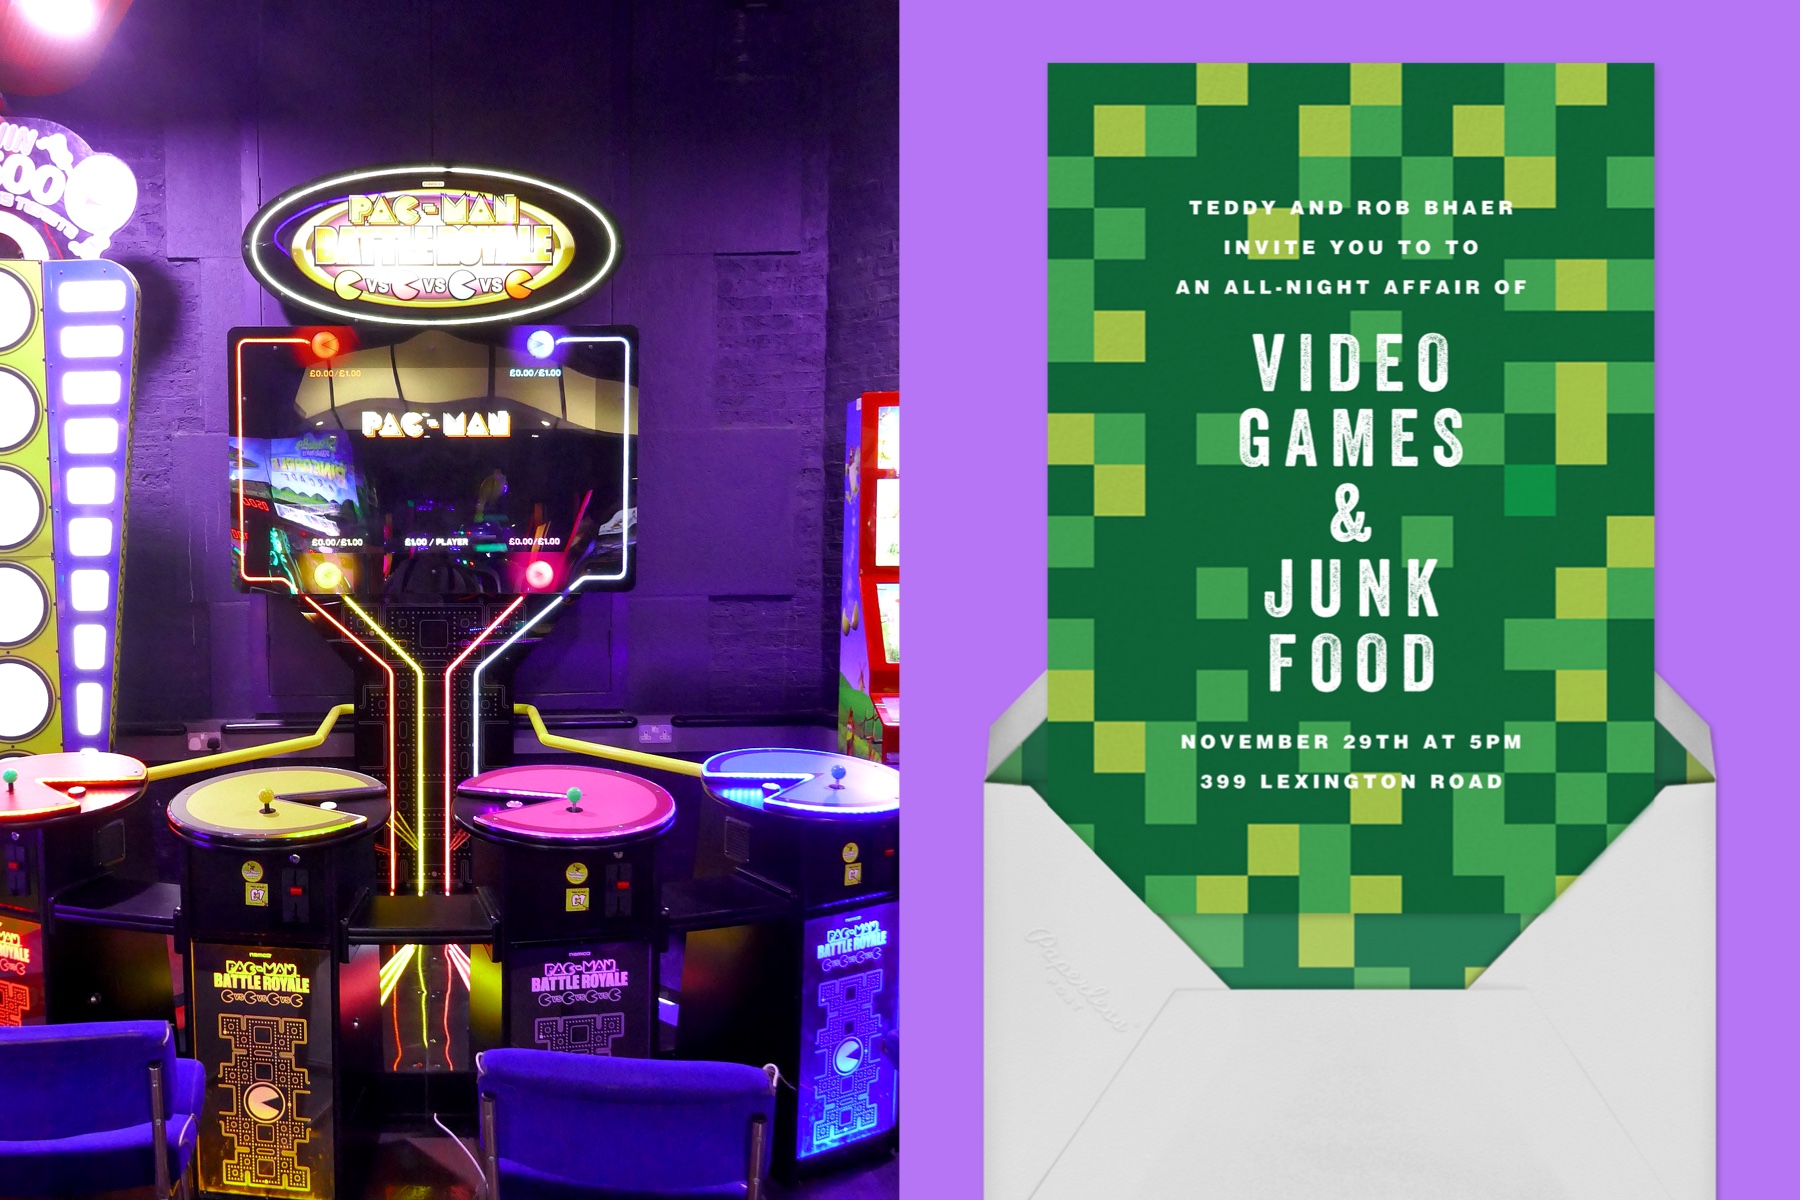 Left: A vintage Pac-Man arcade game. Right: “Pixelation Nation” invitation by Paperless Post featuring large green pixels. 